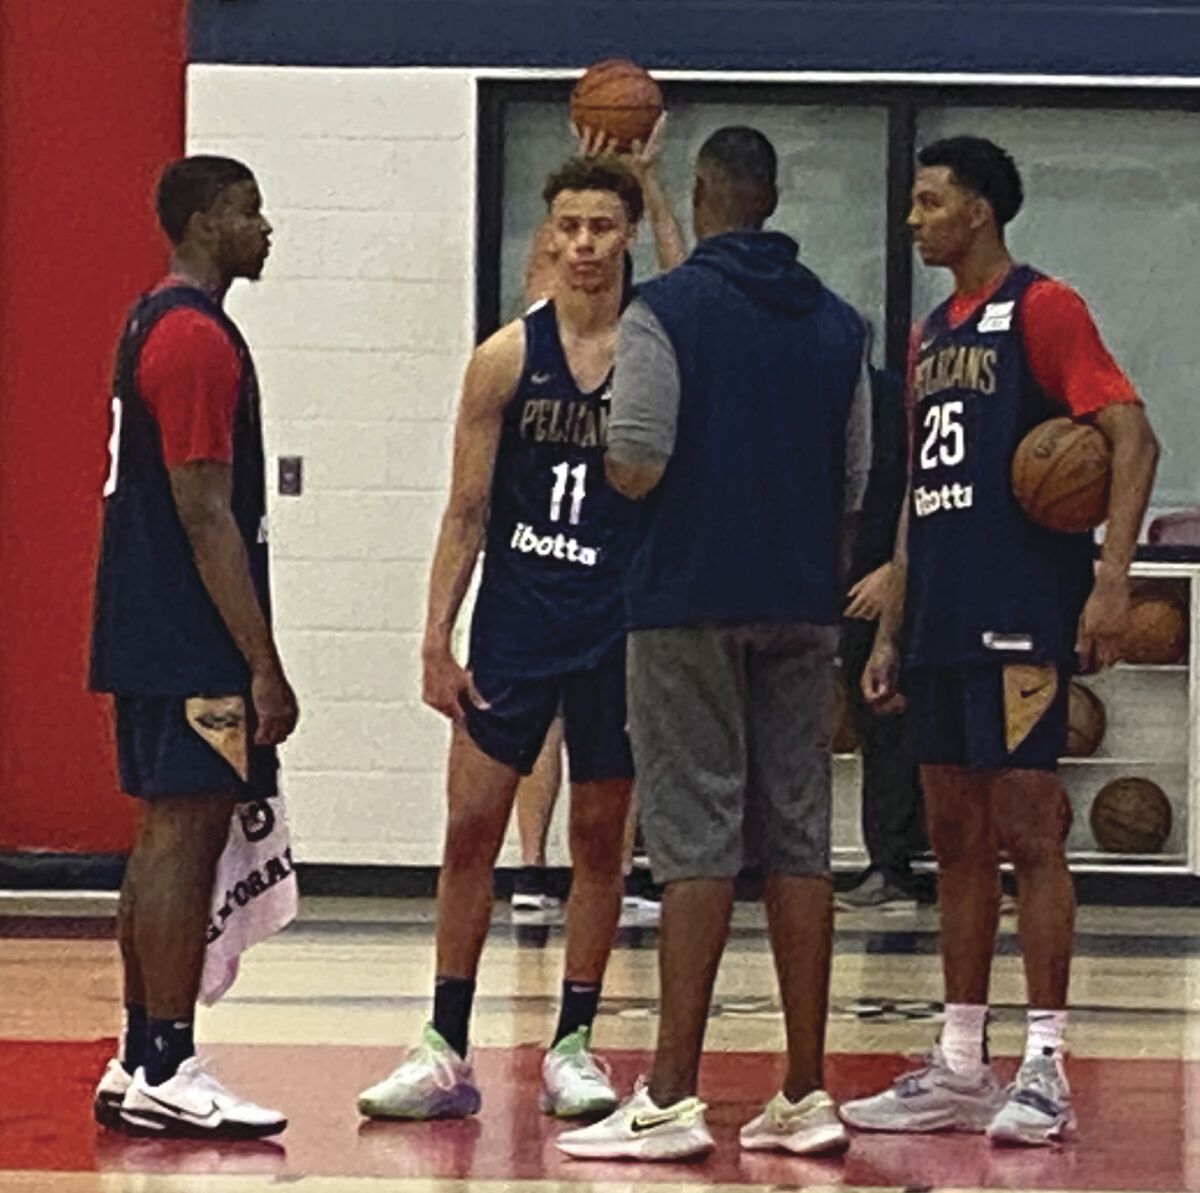 New Orleans Pelicans assistant coach Jarron Collins talks with the team's two Rookies; E.J. Liddell and Dyson Daniels, while second year Guard Trey Murphy III listens to instruction at the Ochsner Sports Performance Center in Metairie, La., Saturday, July 2, 2022. (Hunter Dawkins/The Gazebo Gazette via AP)